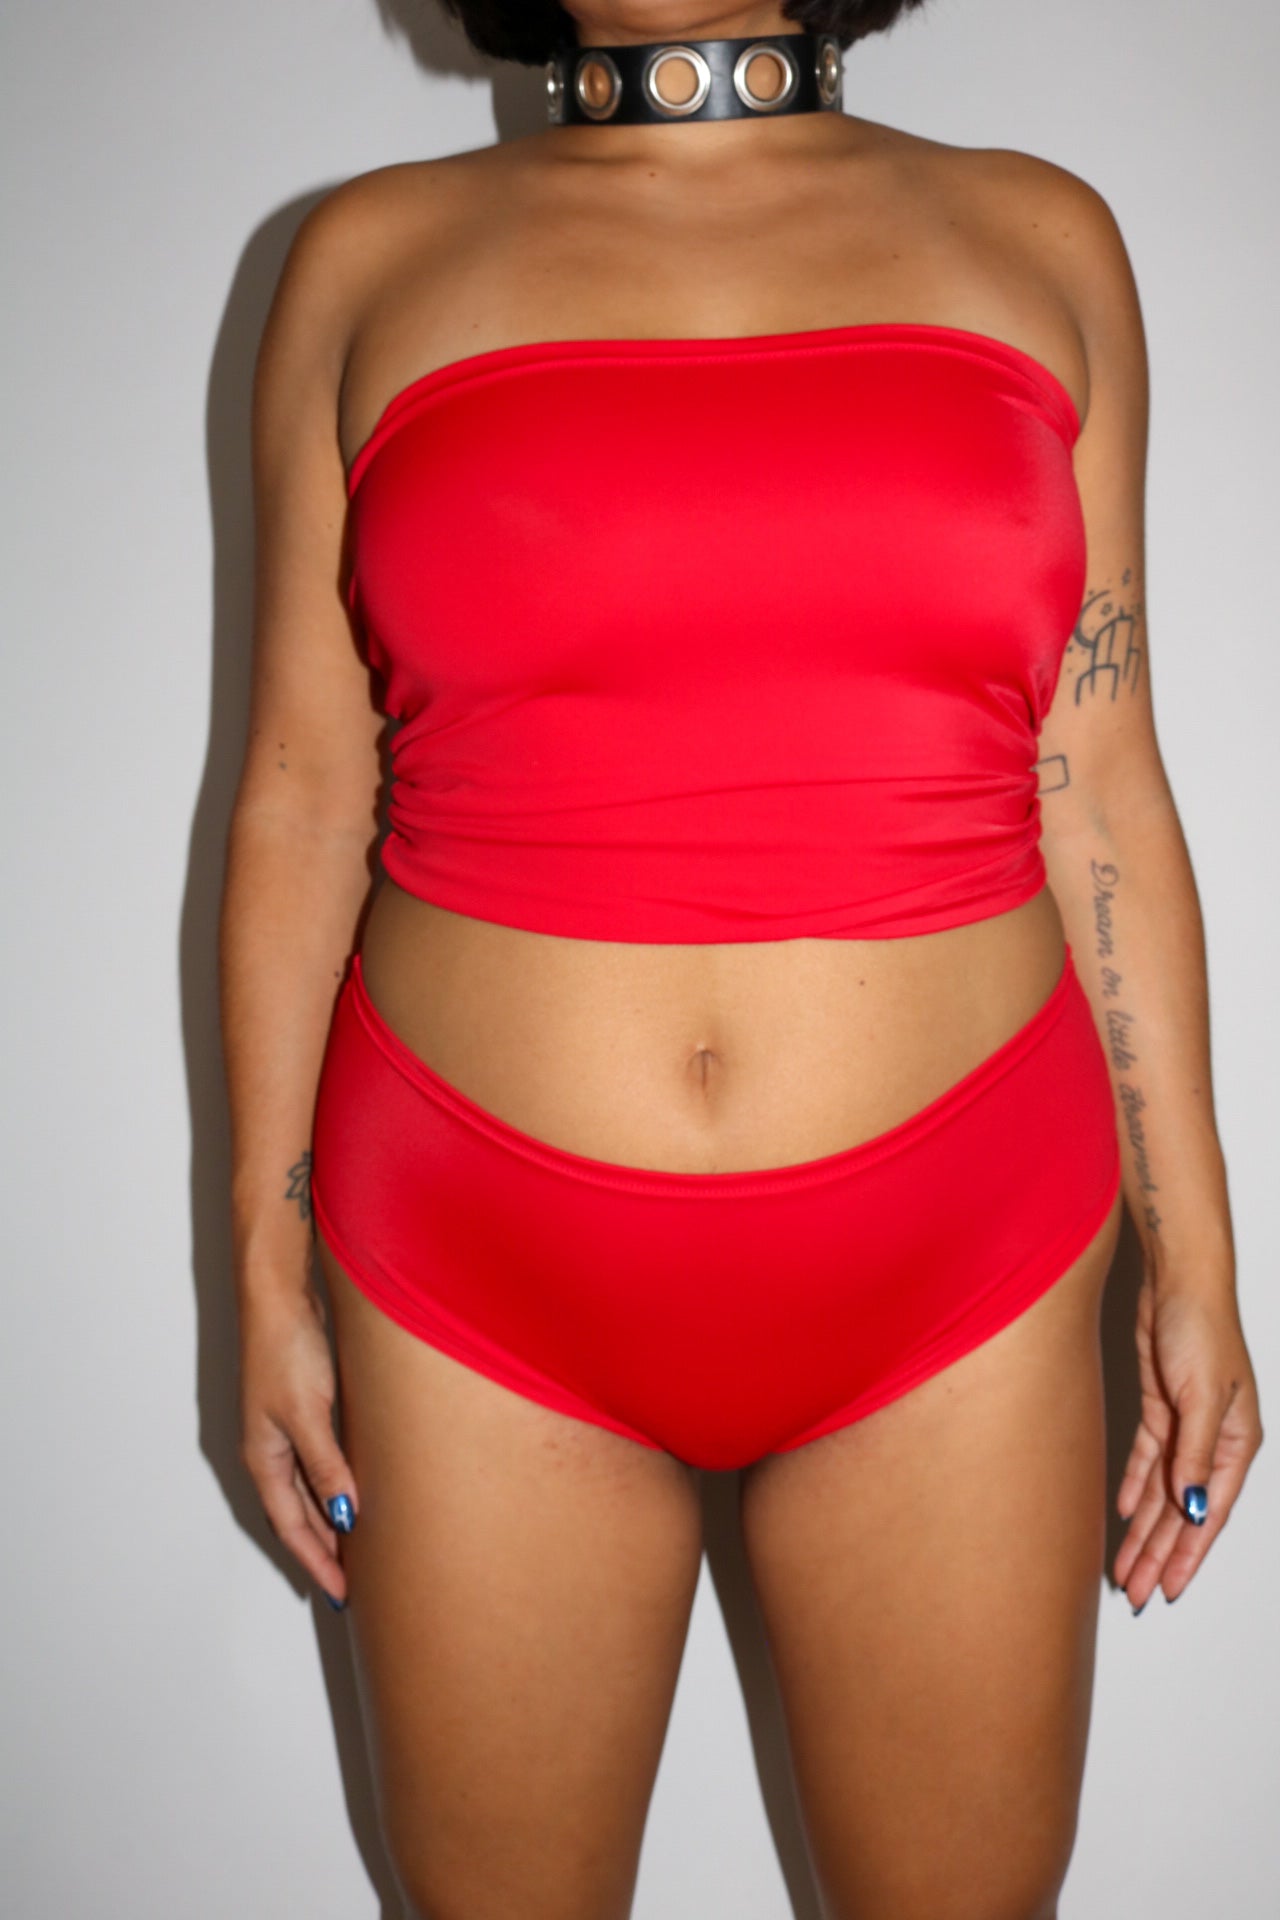 Midlength Tube Top in Red tube top Mi Gente Clothing   